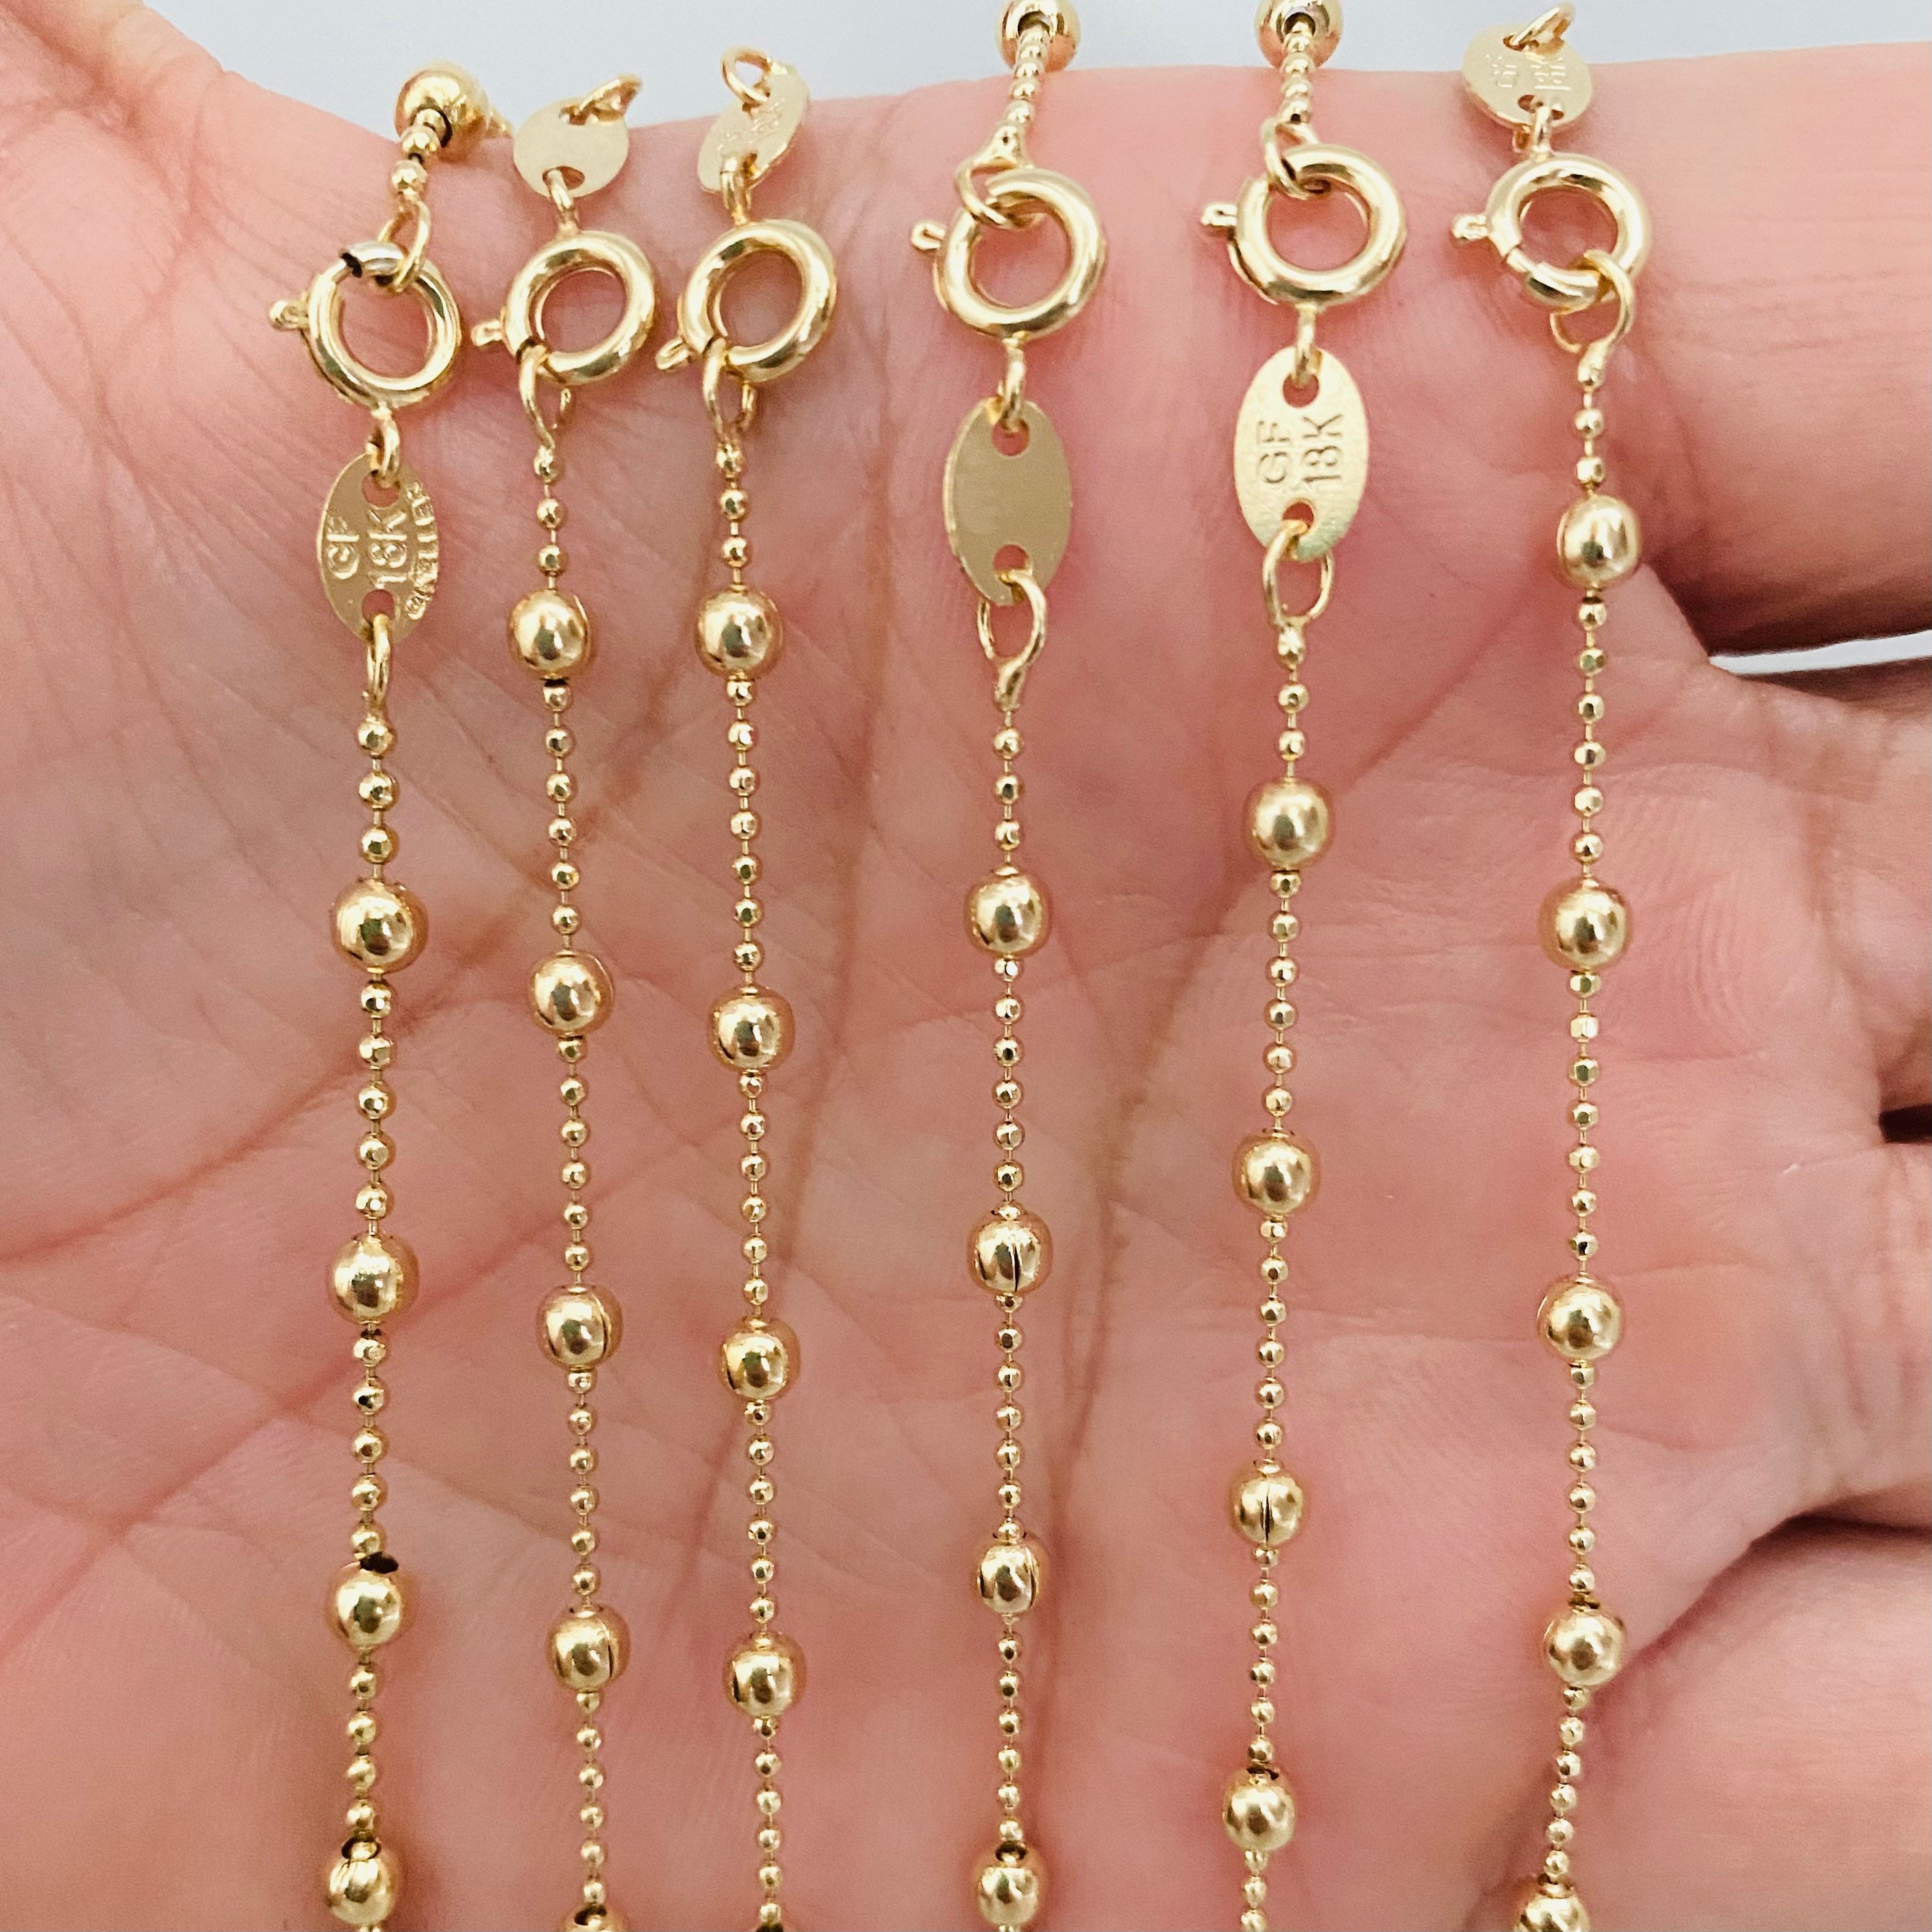 Wholesale 12pcs Gold Plated Solid Brass Satellite Beaded Ball Curb Thin Chain Necklace for Jewelry Making (18 inch)